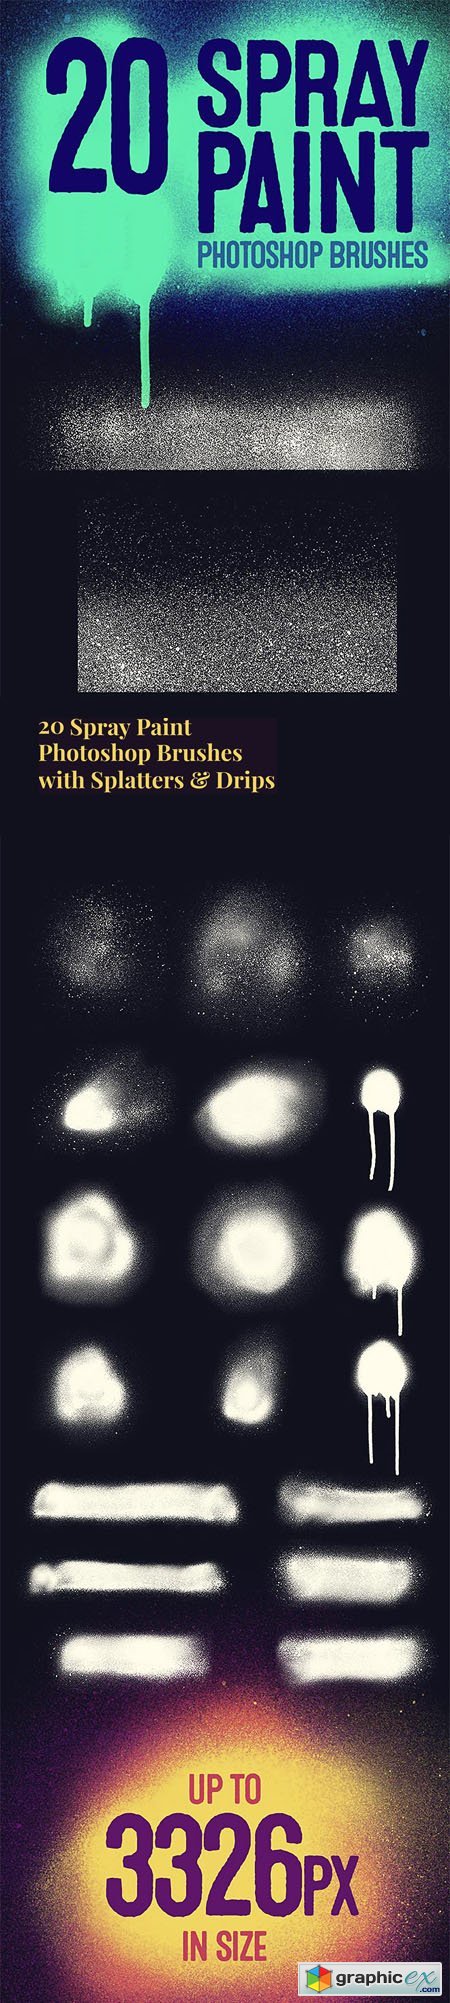 20 Spray Paint Brushes for Photoshop with Splatters & Drips